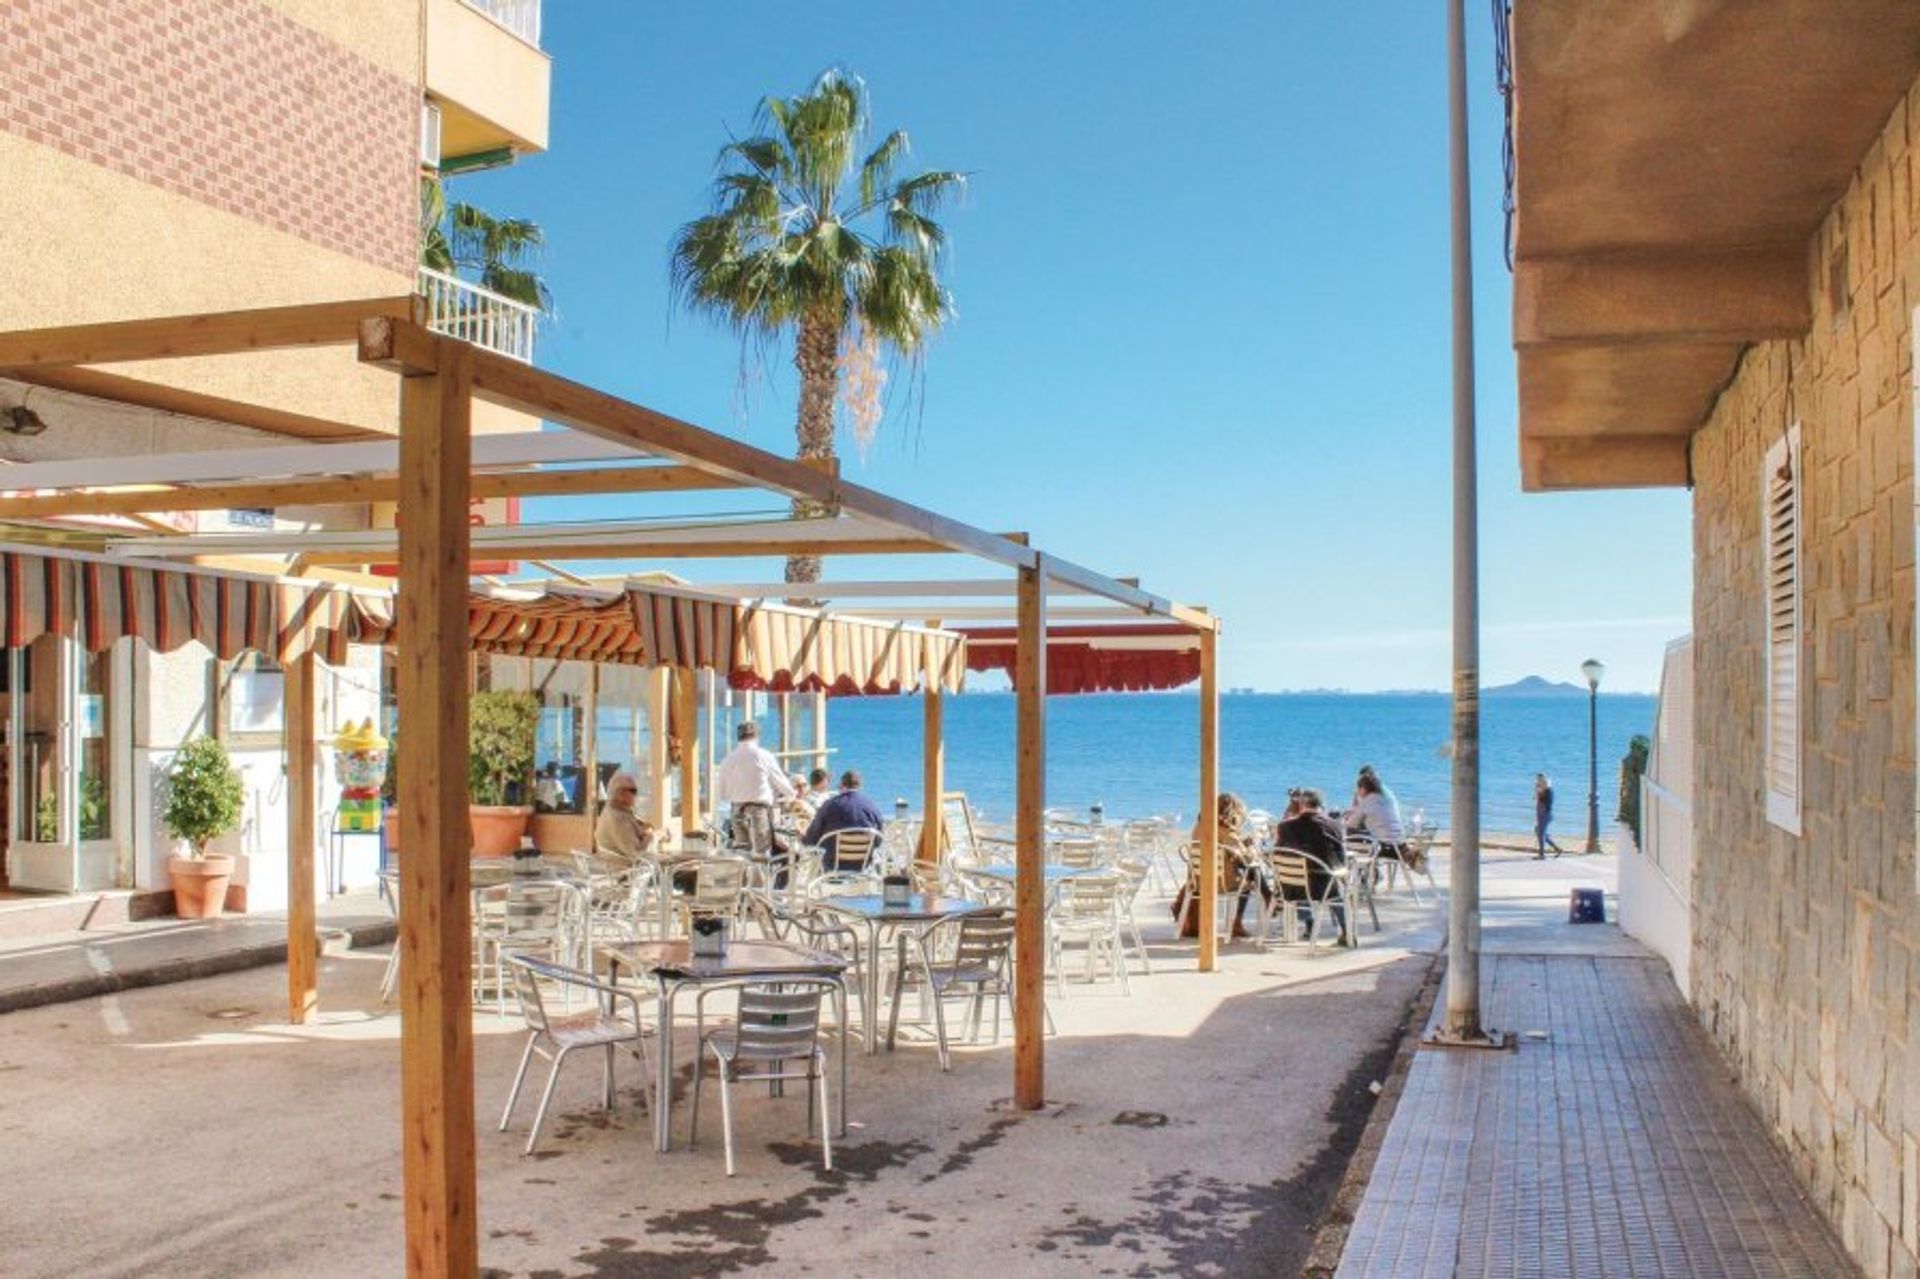 Enjoy glorious views of the coast from one of the many tapas bars dotted along Los Alcazares' seafront promenade